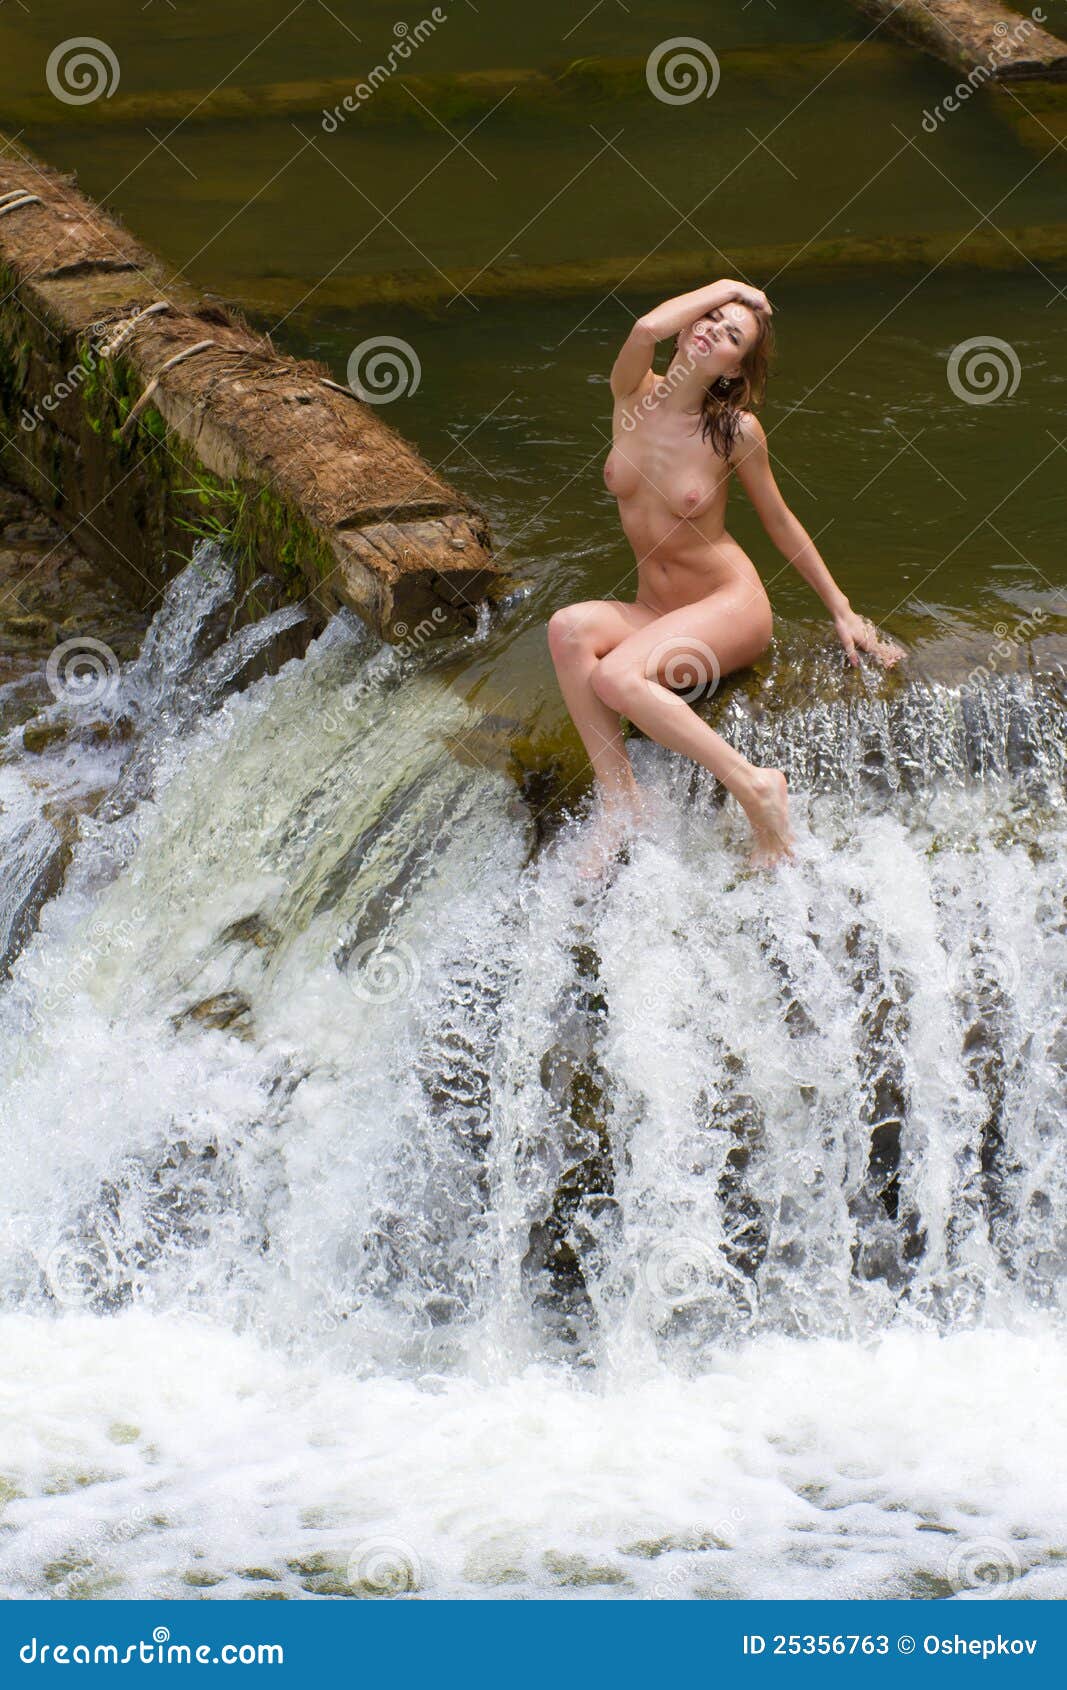 Naked Girl Sitting by a Waterfall